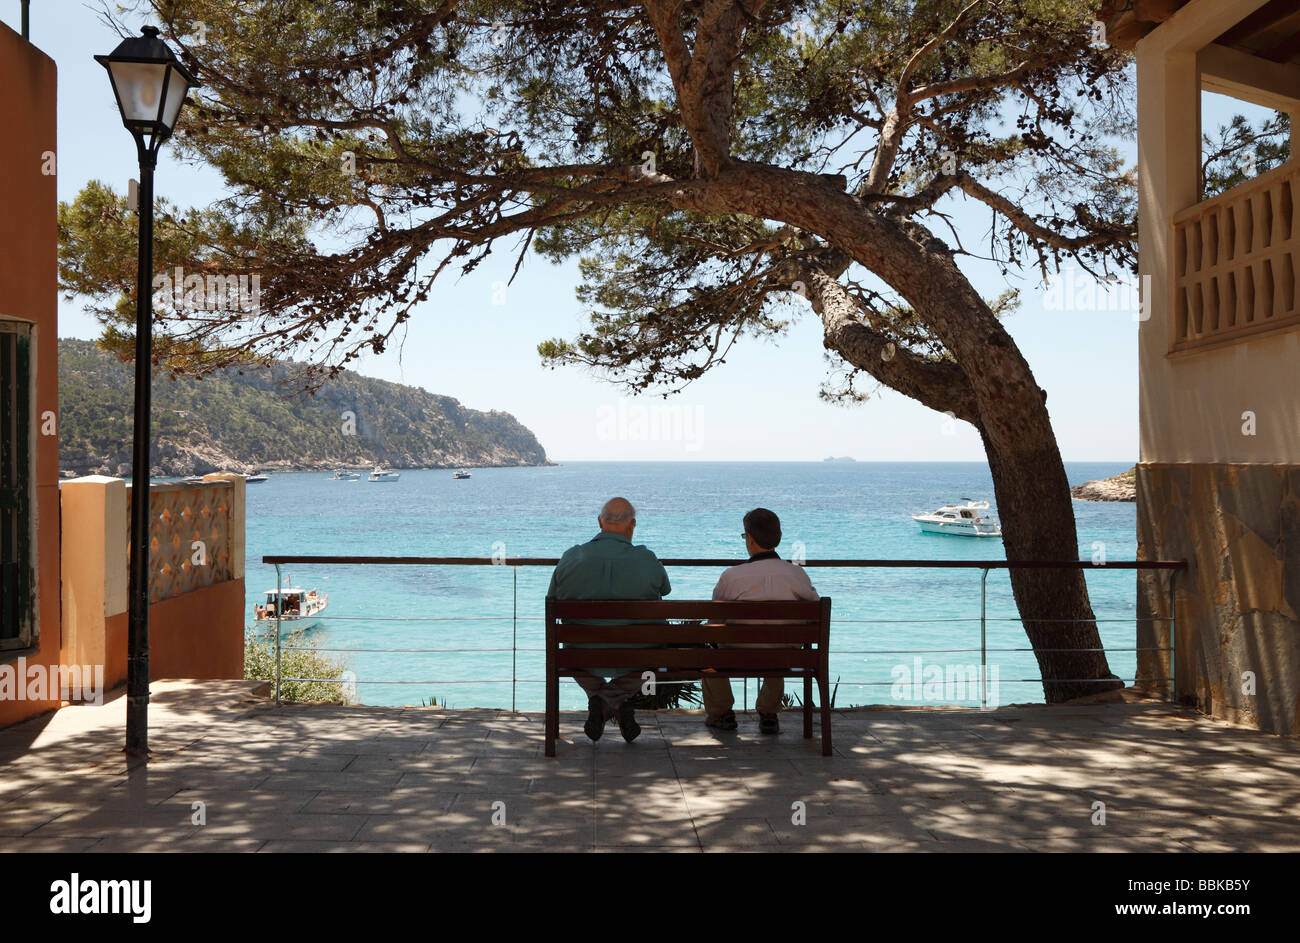 Two men sitting on a public bench in Saint Elm overlooking the sea in Majorca Stock Photo